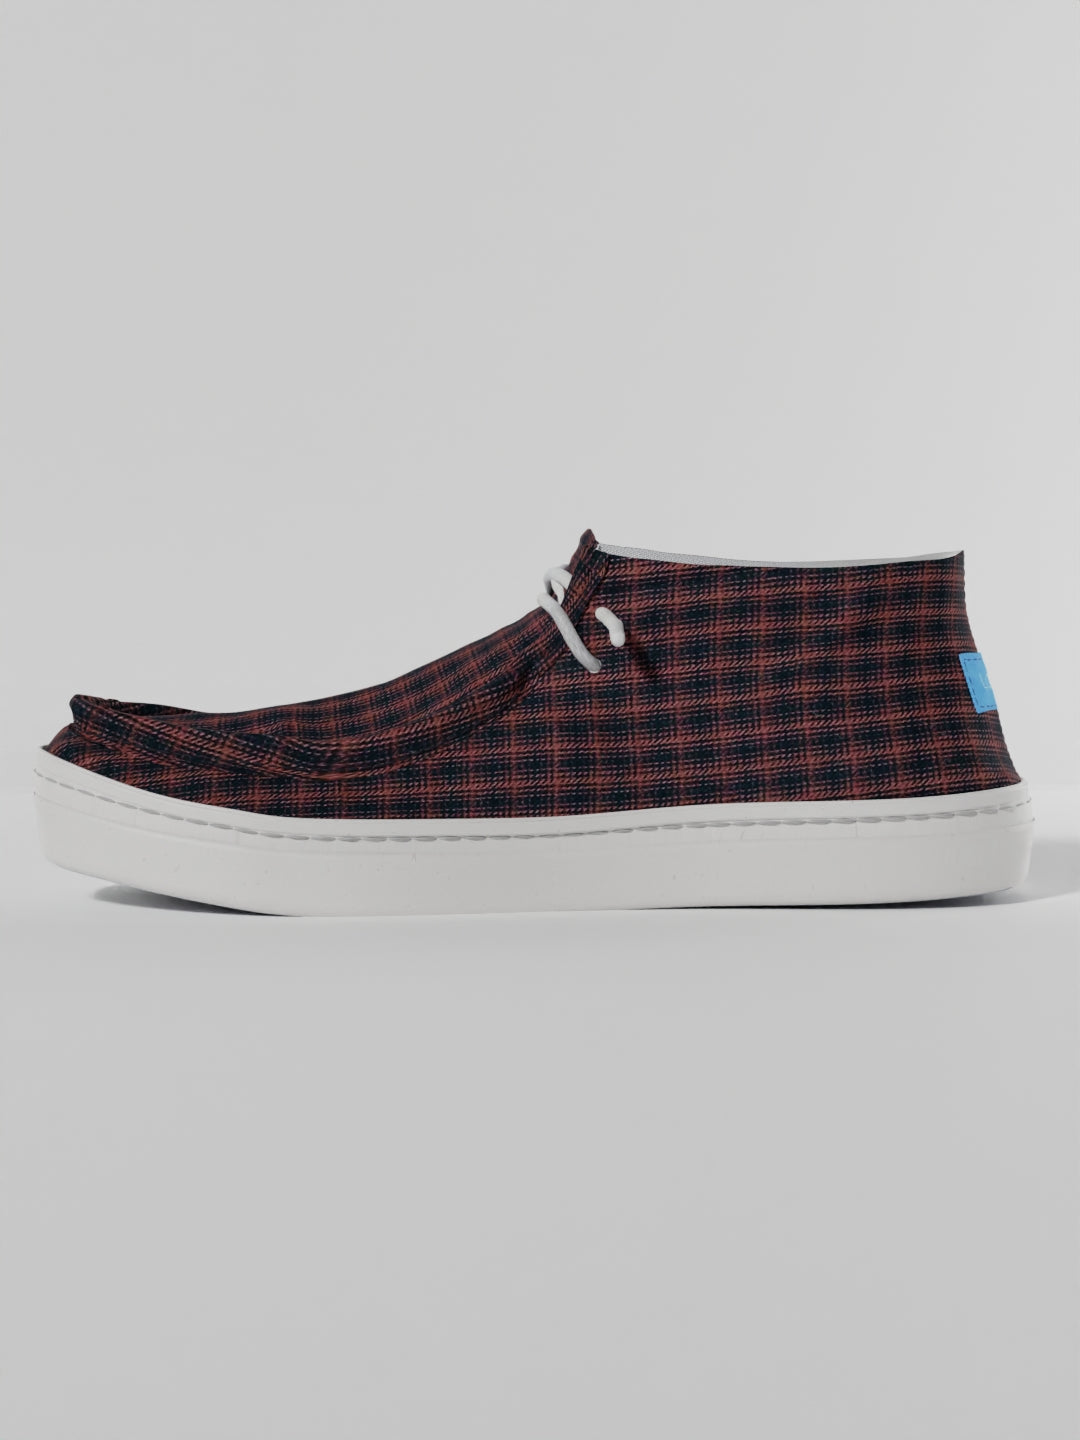 The Luna High Top Brown Small Check